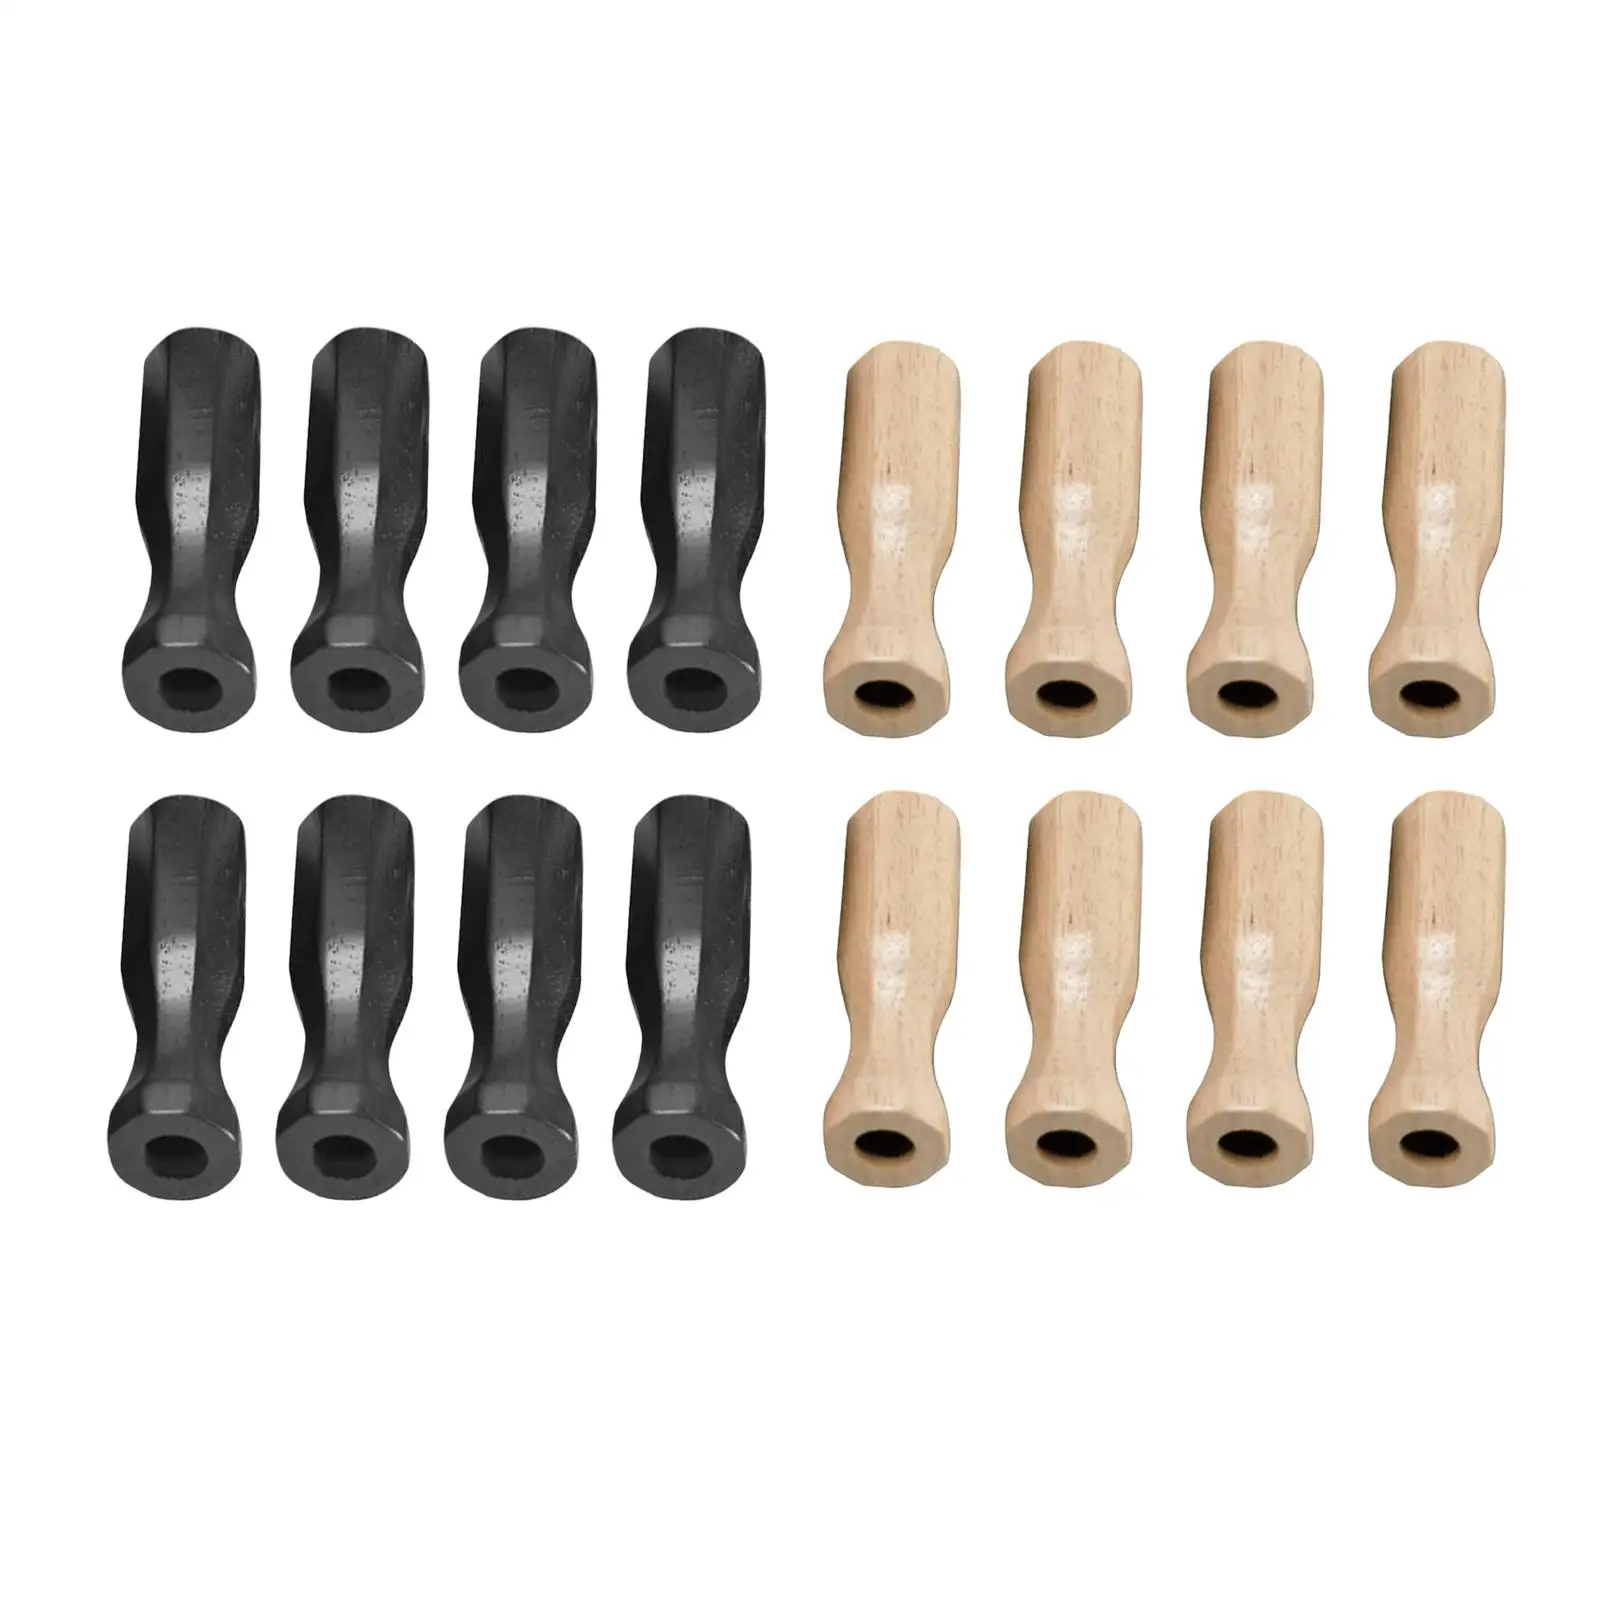 8 pieces soccer table grips, foosball grip, more portable, more durable